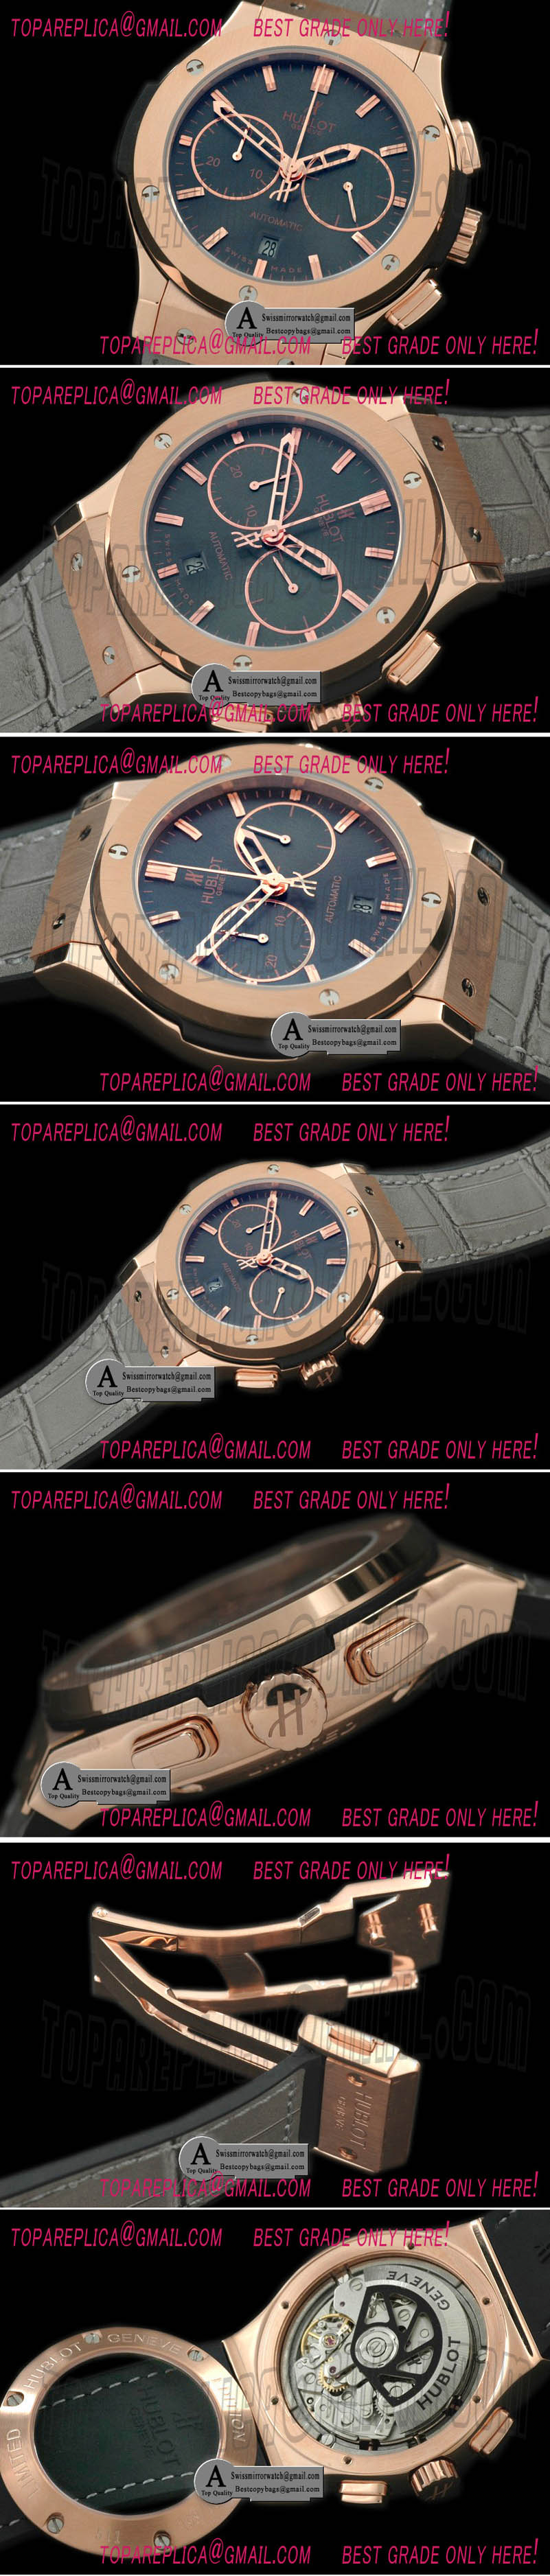 Hublot 521.OX.7080.LR Classic Fusion Chrono Rose Gold/Leather Grey A-7750 Sec@3 Replica Watches